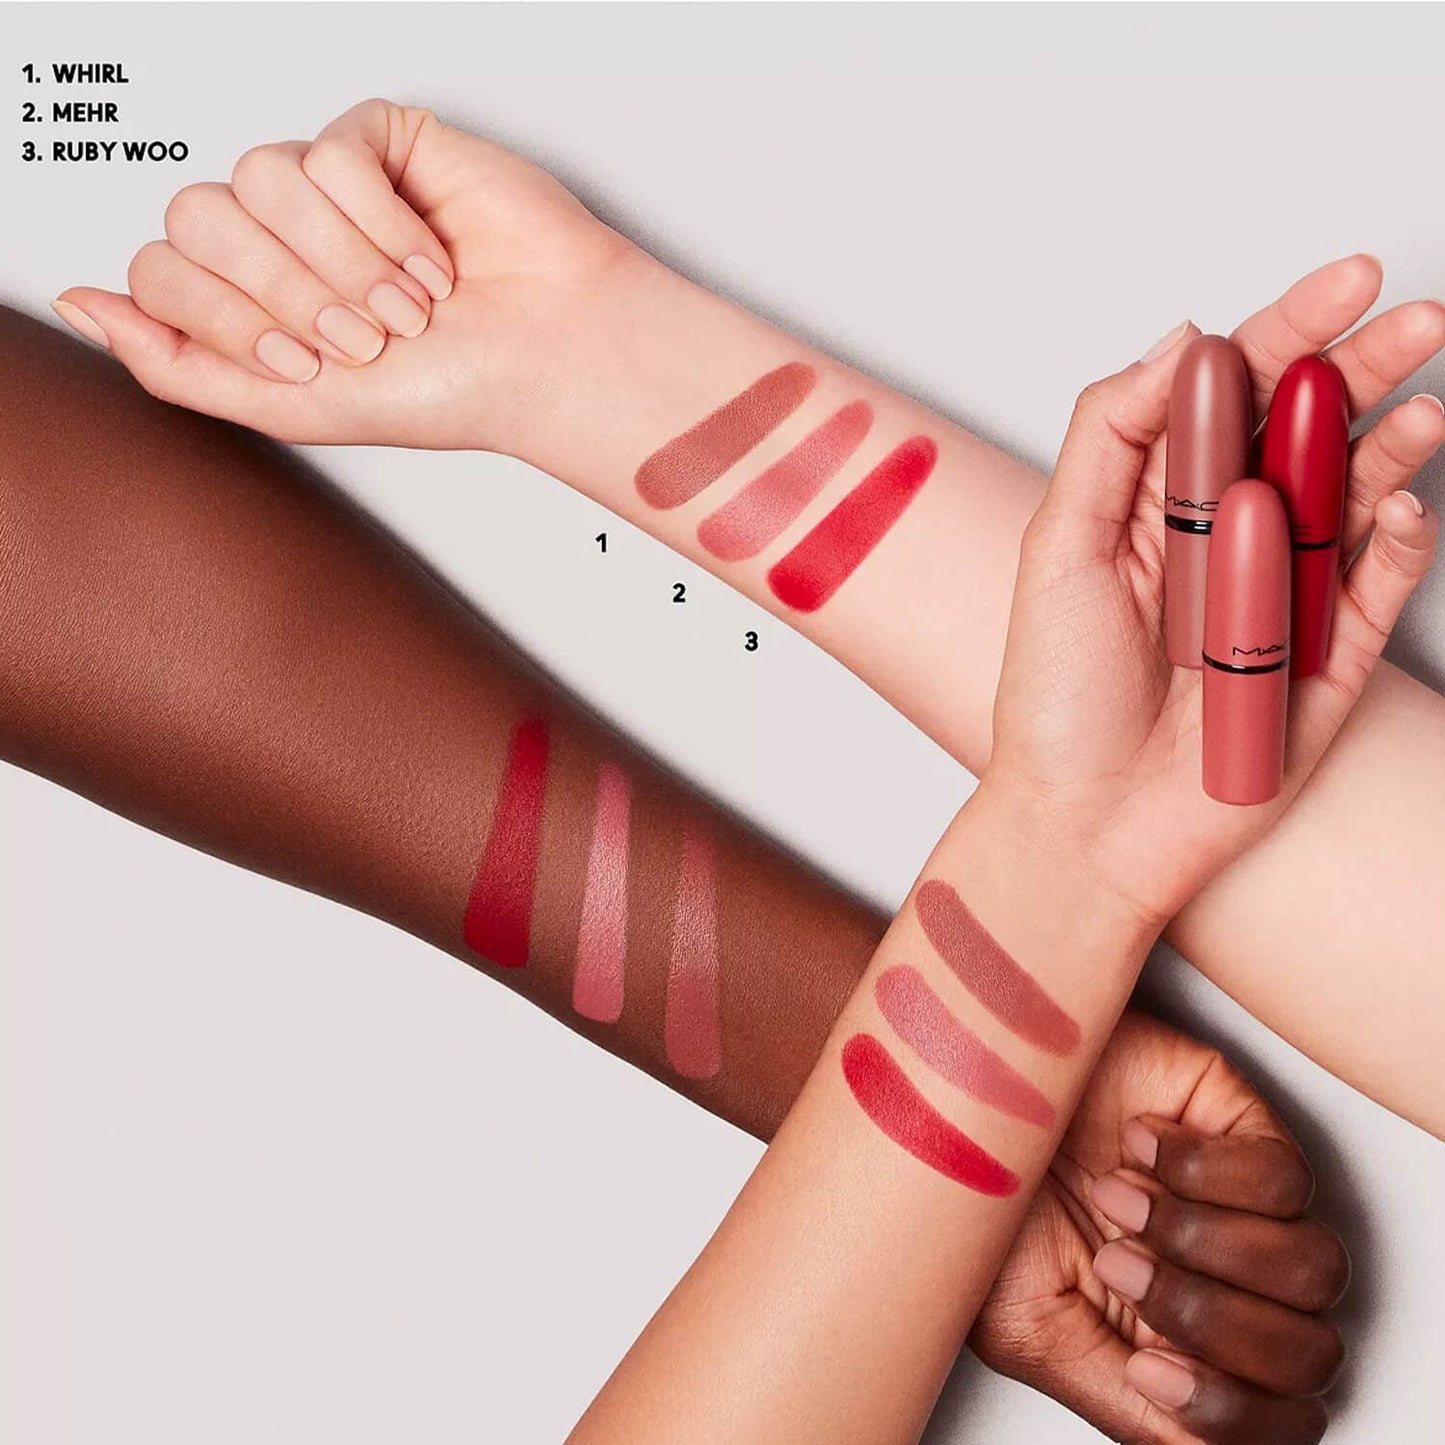 swatch of mac lipstick trio set in whirl, mehr and ruby woo shades available at heygirl.pk for delivery in Pakistan